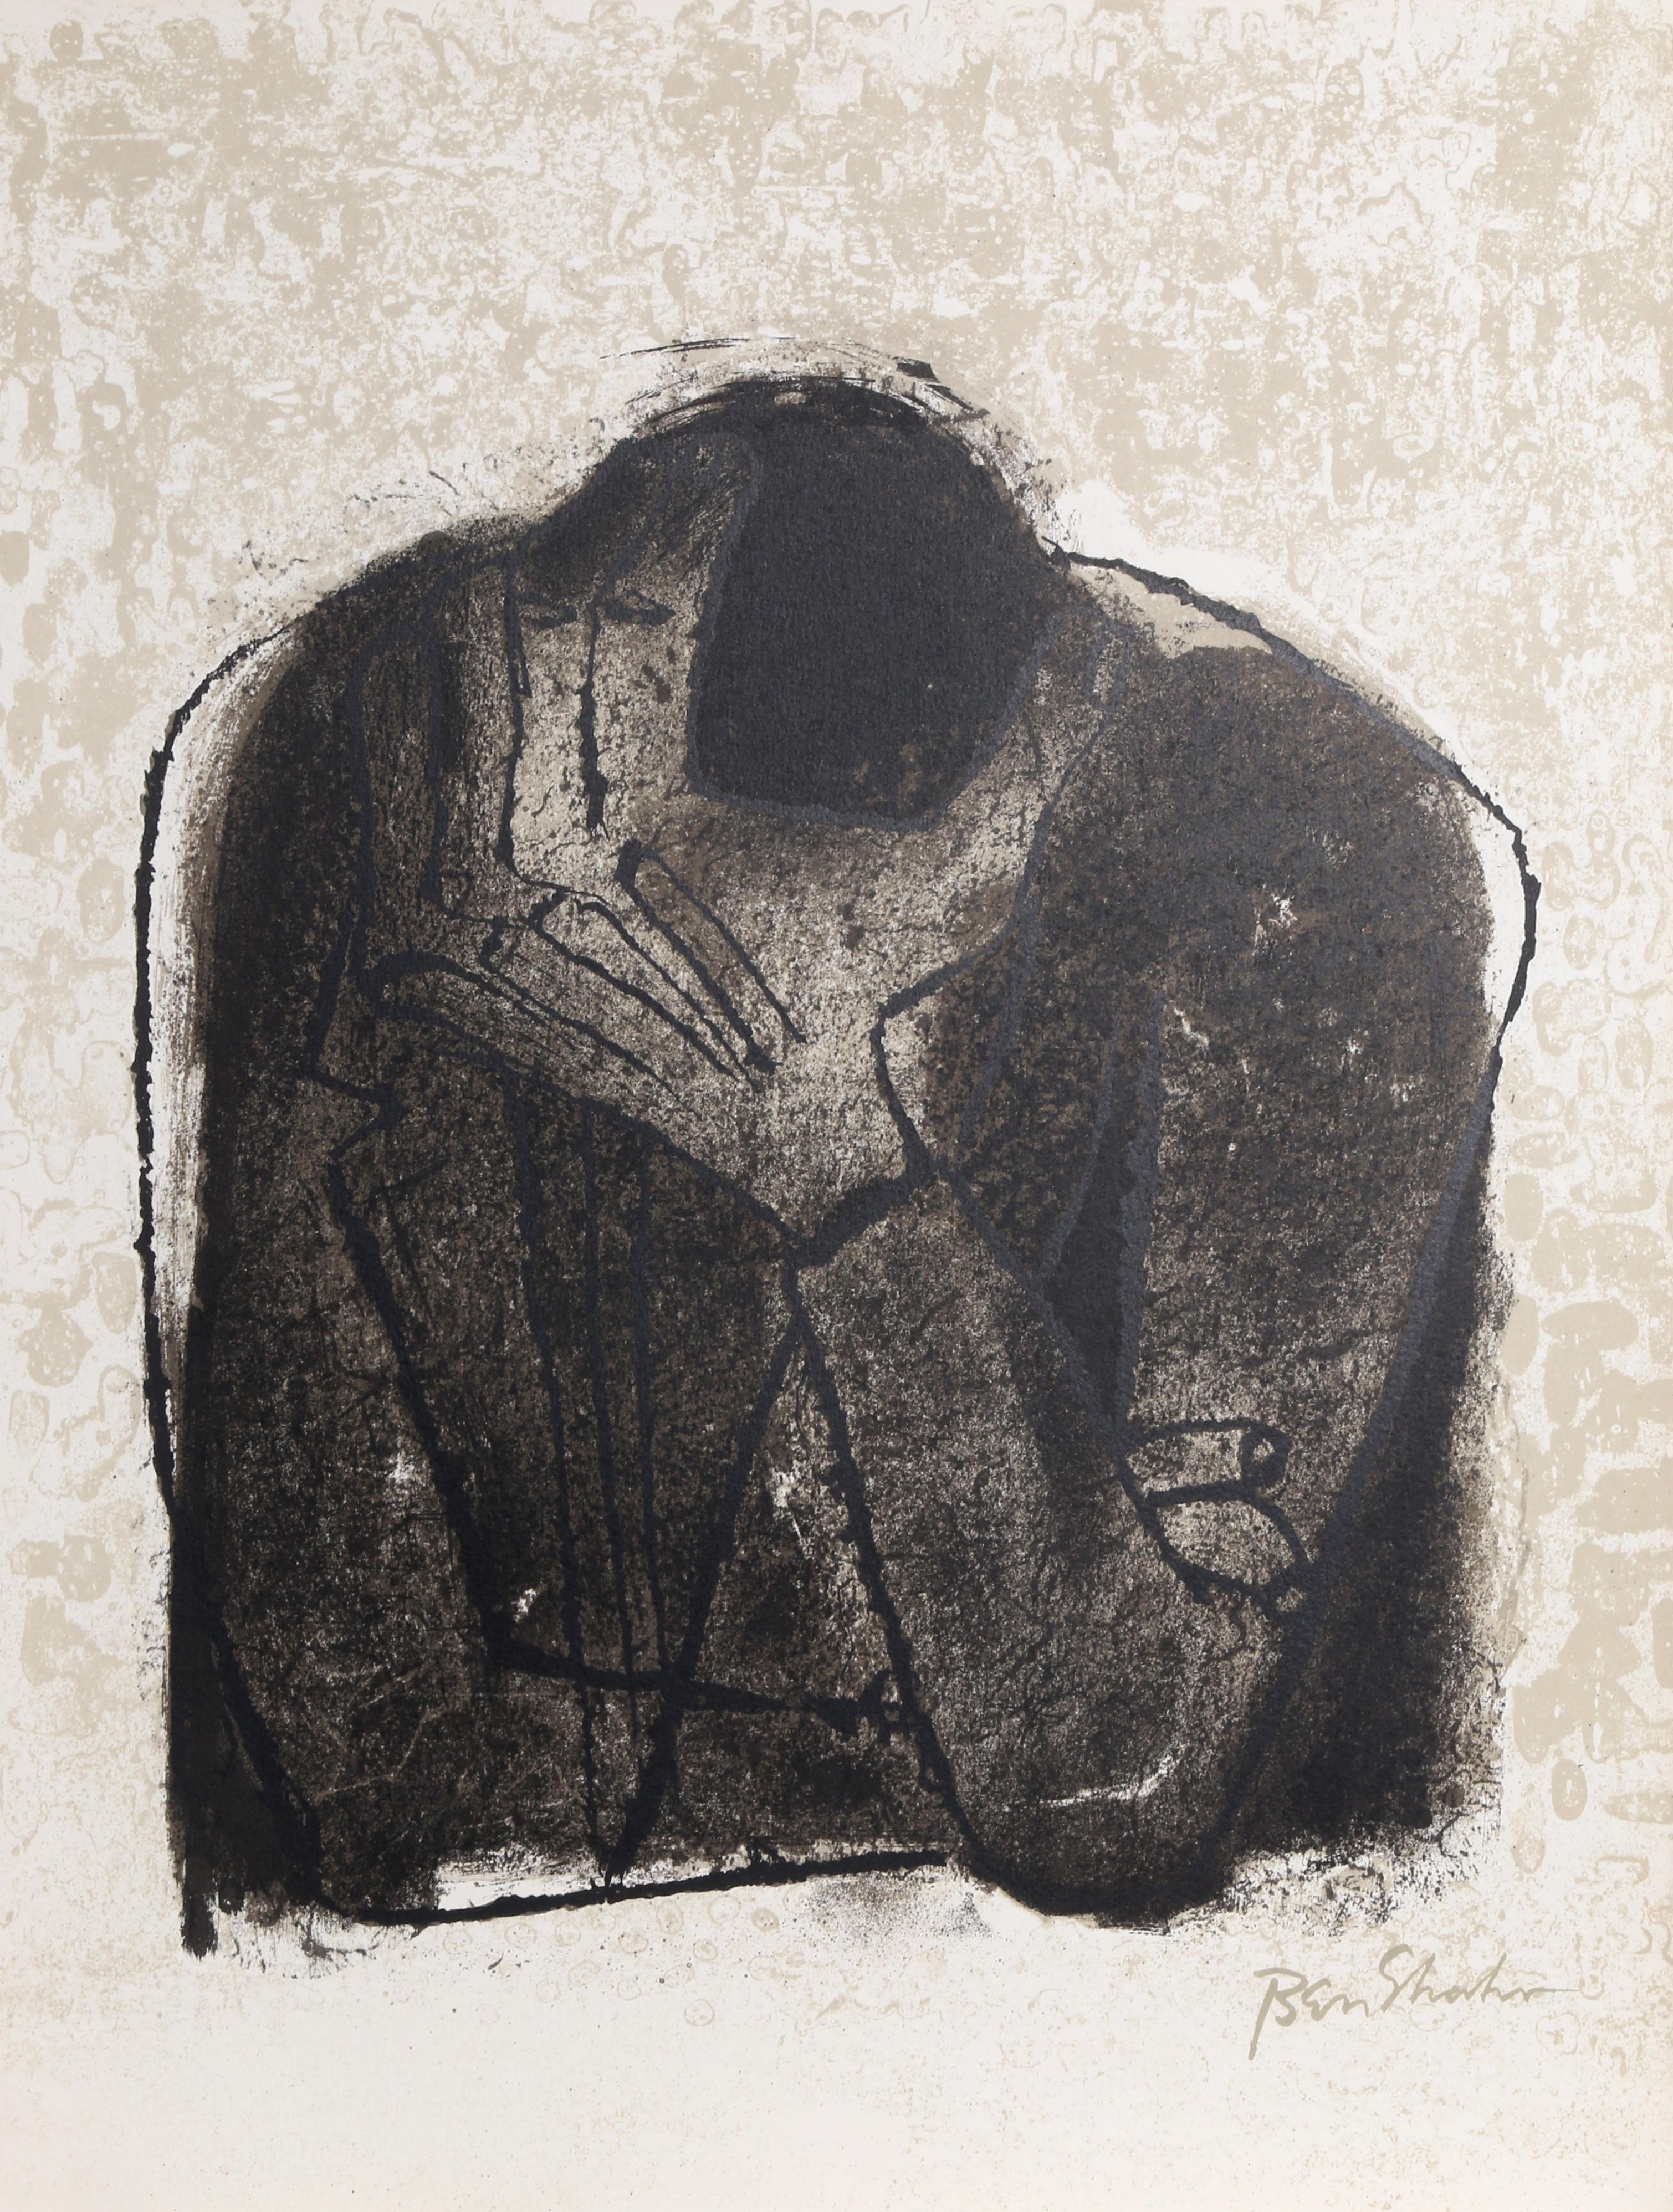 Beside the Dead from the Rilke Portfolio, Lithograph by Ben Shahn